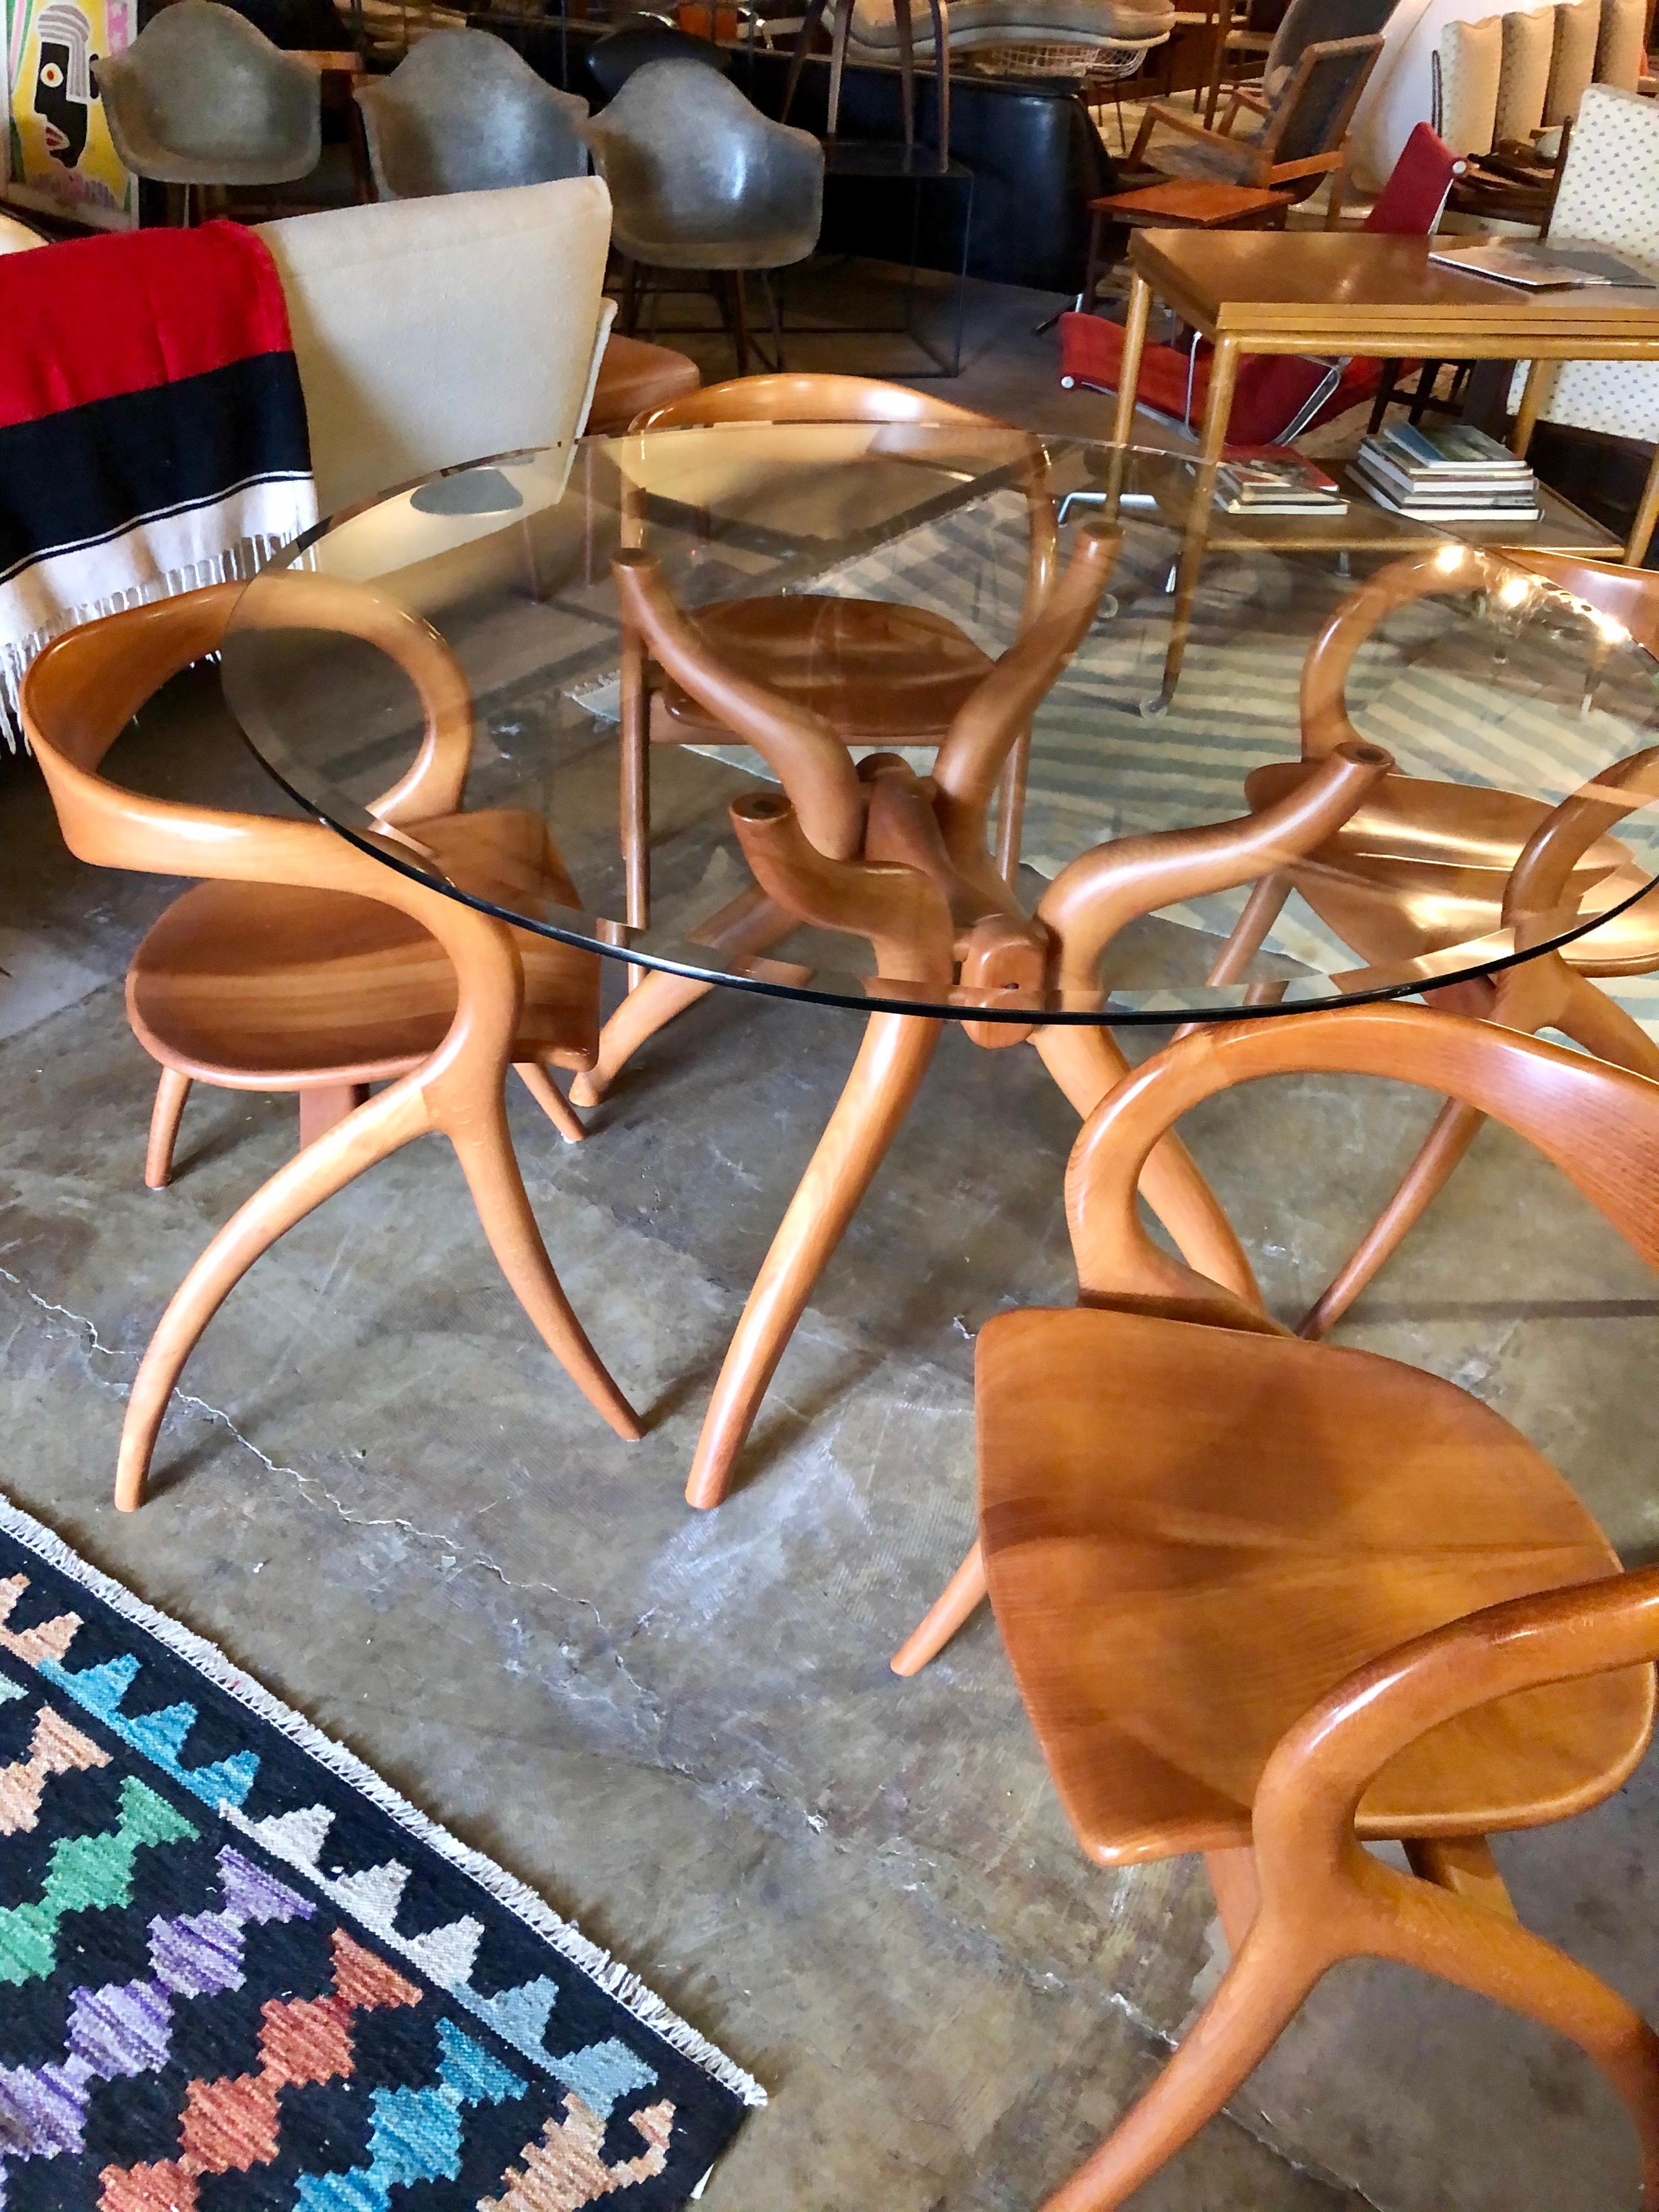 Designed by A. Sibau, this table set is in overall good condition. Beveled glass top. Solid cherrywood base and chairs,
circa 1980s, Italy.
Dimensions:
21